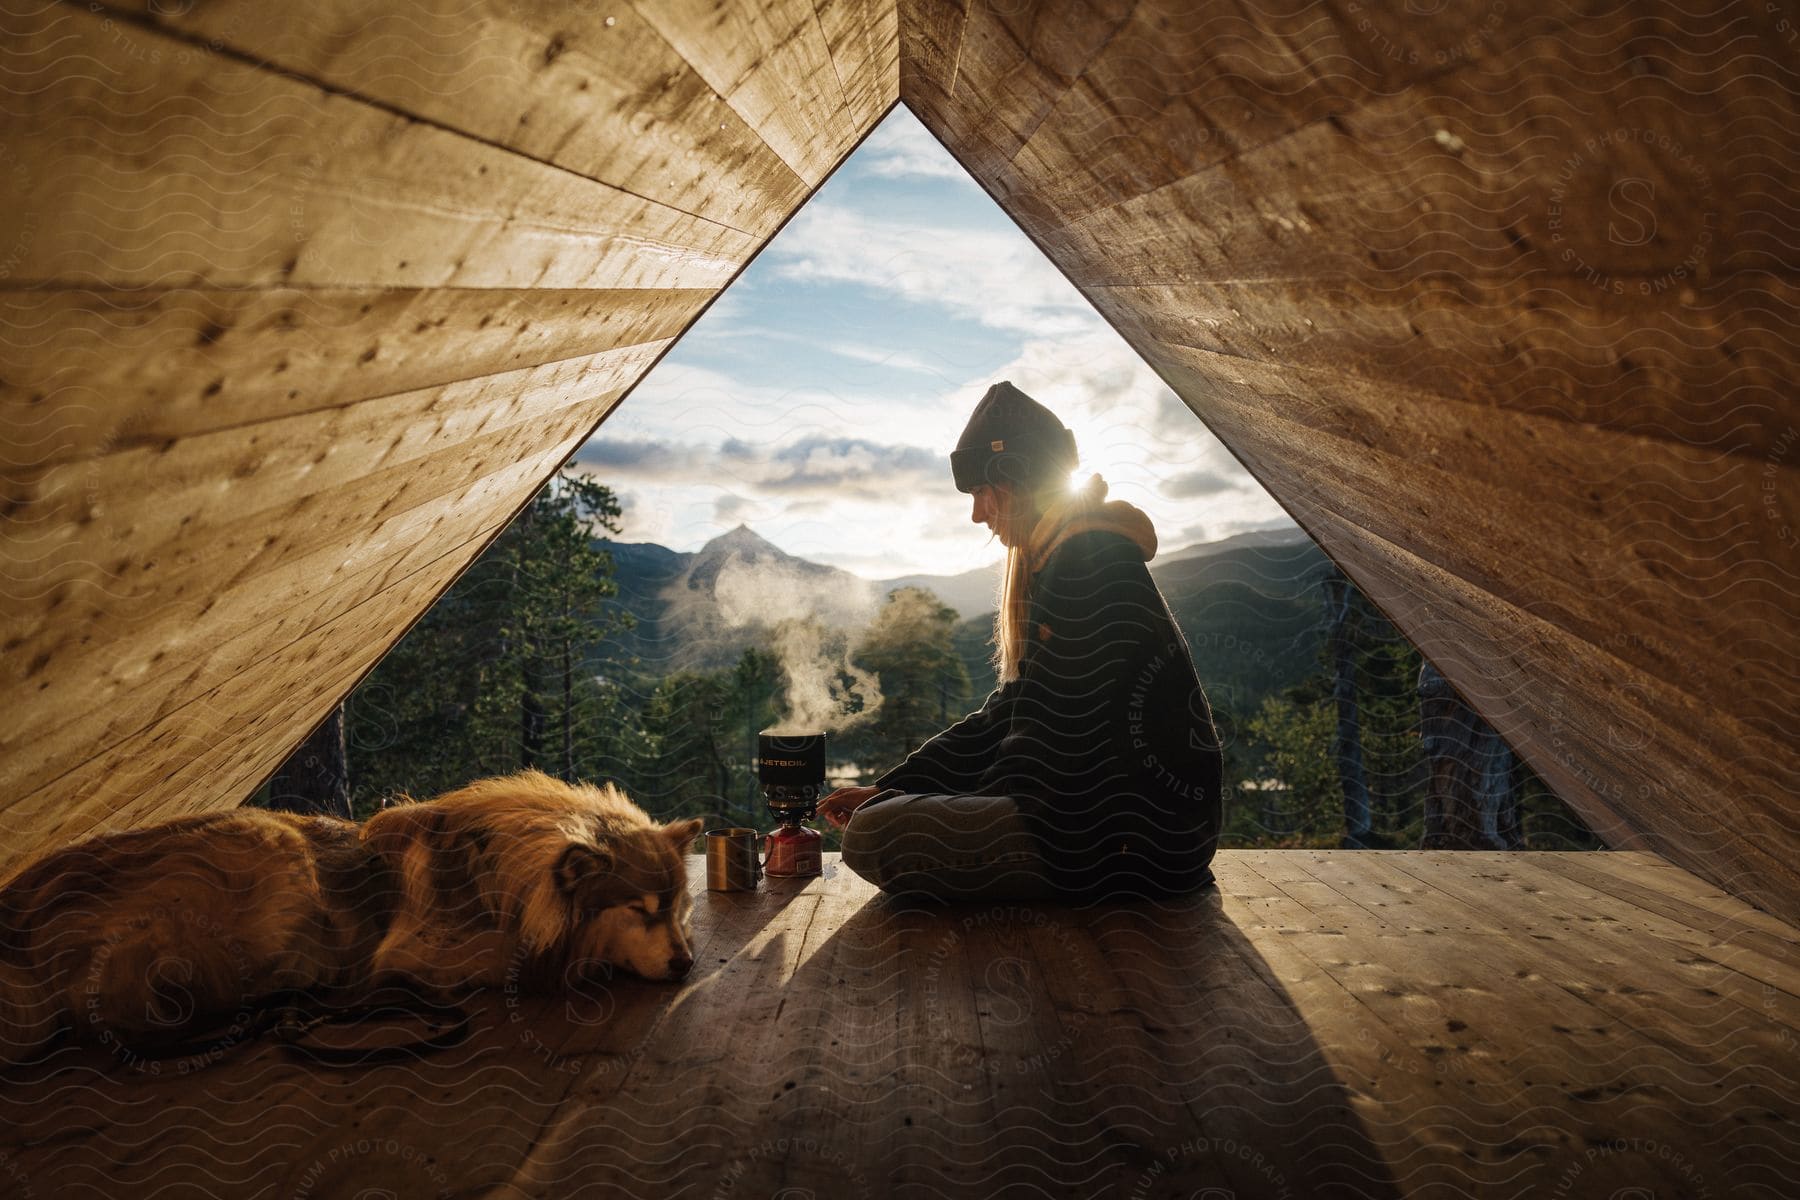 A woman camping with her pet dog sitting in a tent